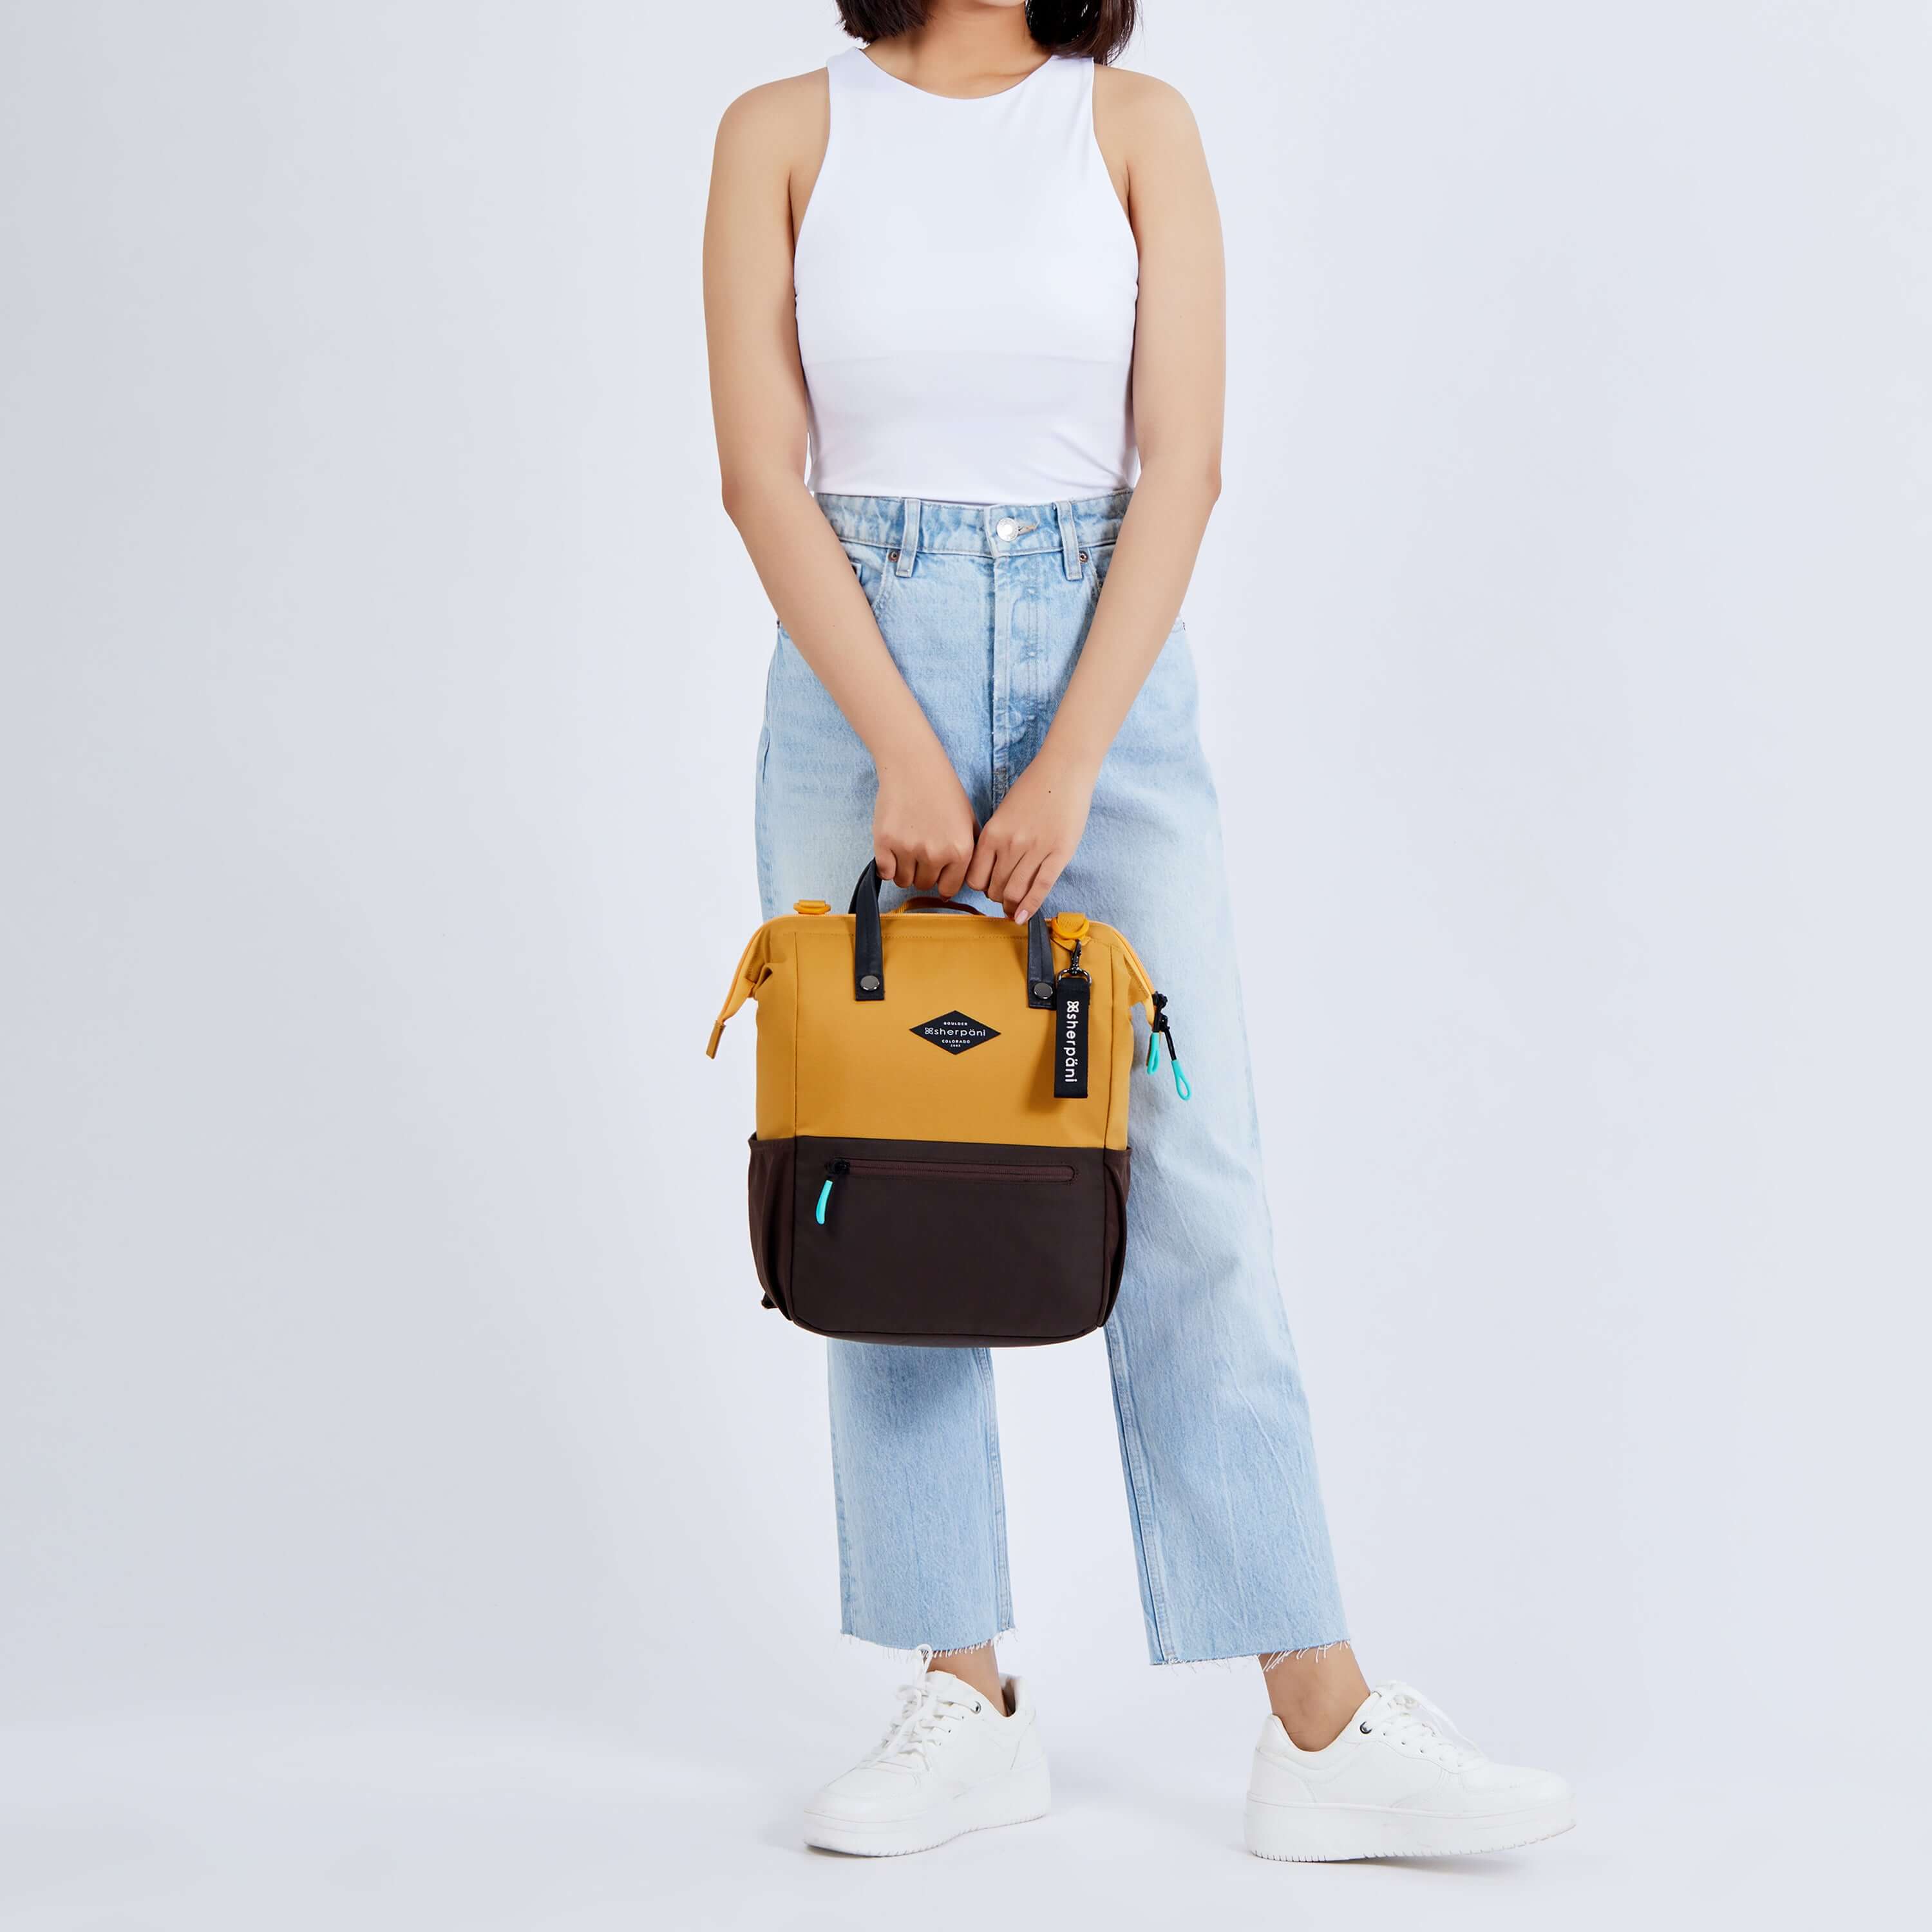 Full body view of a dark haired model facing the camera. She is wearing a white tank top, jeans and white sneakers. She carries Sherpani three in one bag, the Dispatch in Sundial, by its tote handles. 